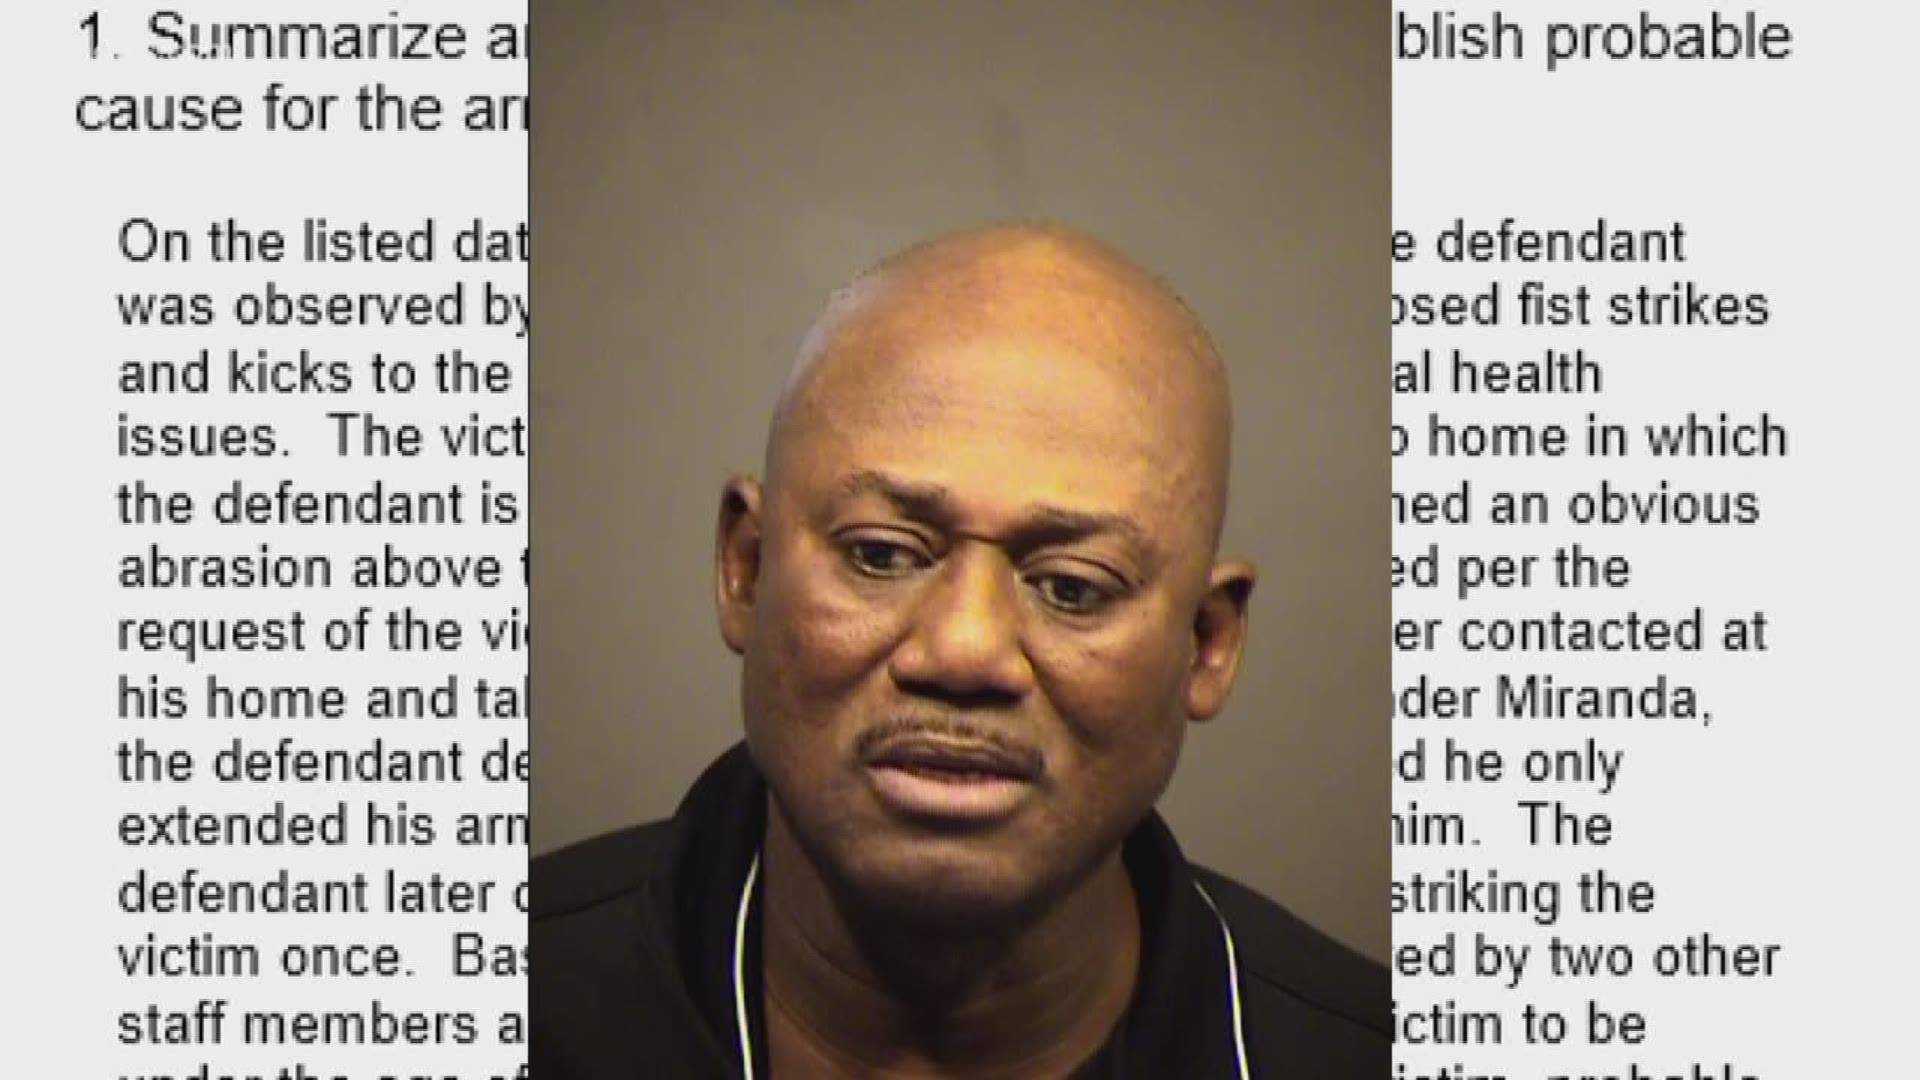 According to documents, 61-year-old Anthony "Tony" Adusei kicked and hit a teenaged boy on the autism spectrum who was in his care. The suspect was working at the Care and Dignity group home in east Mesa.